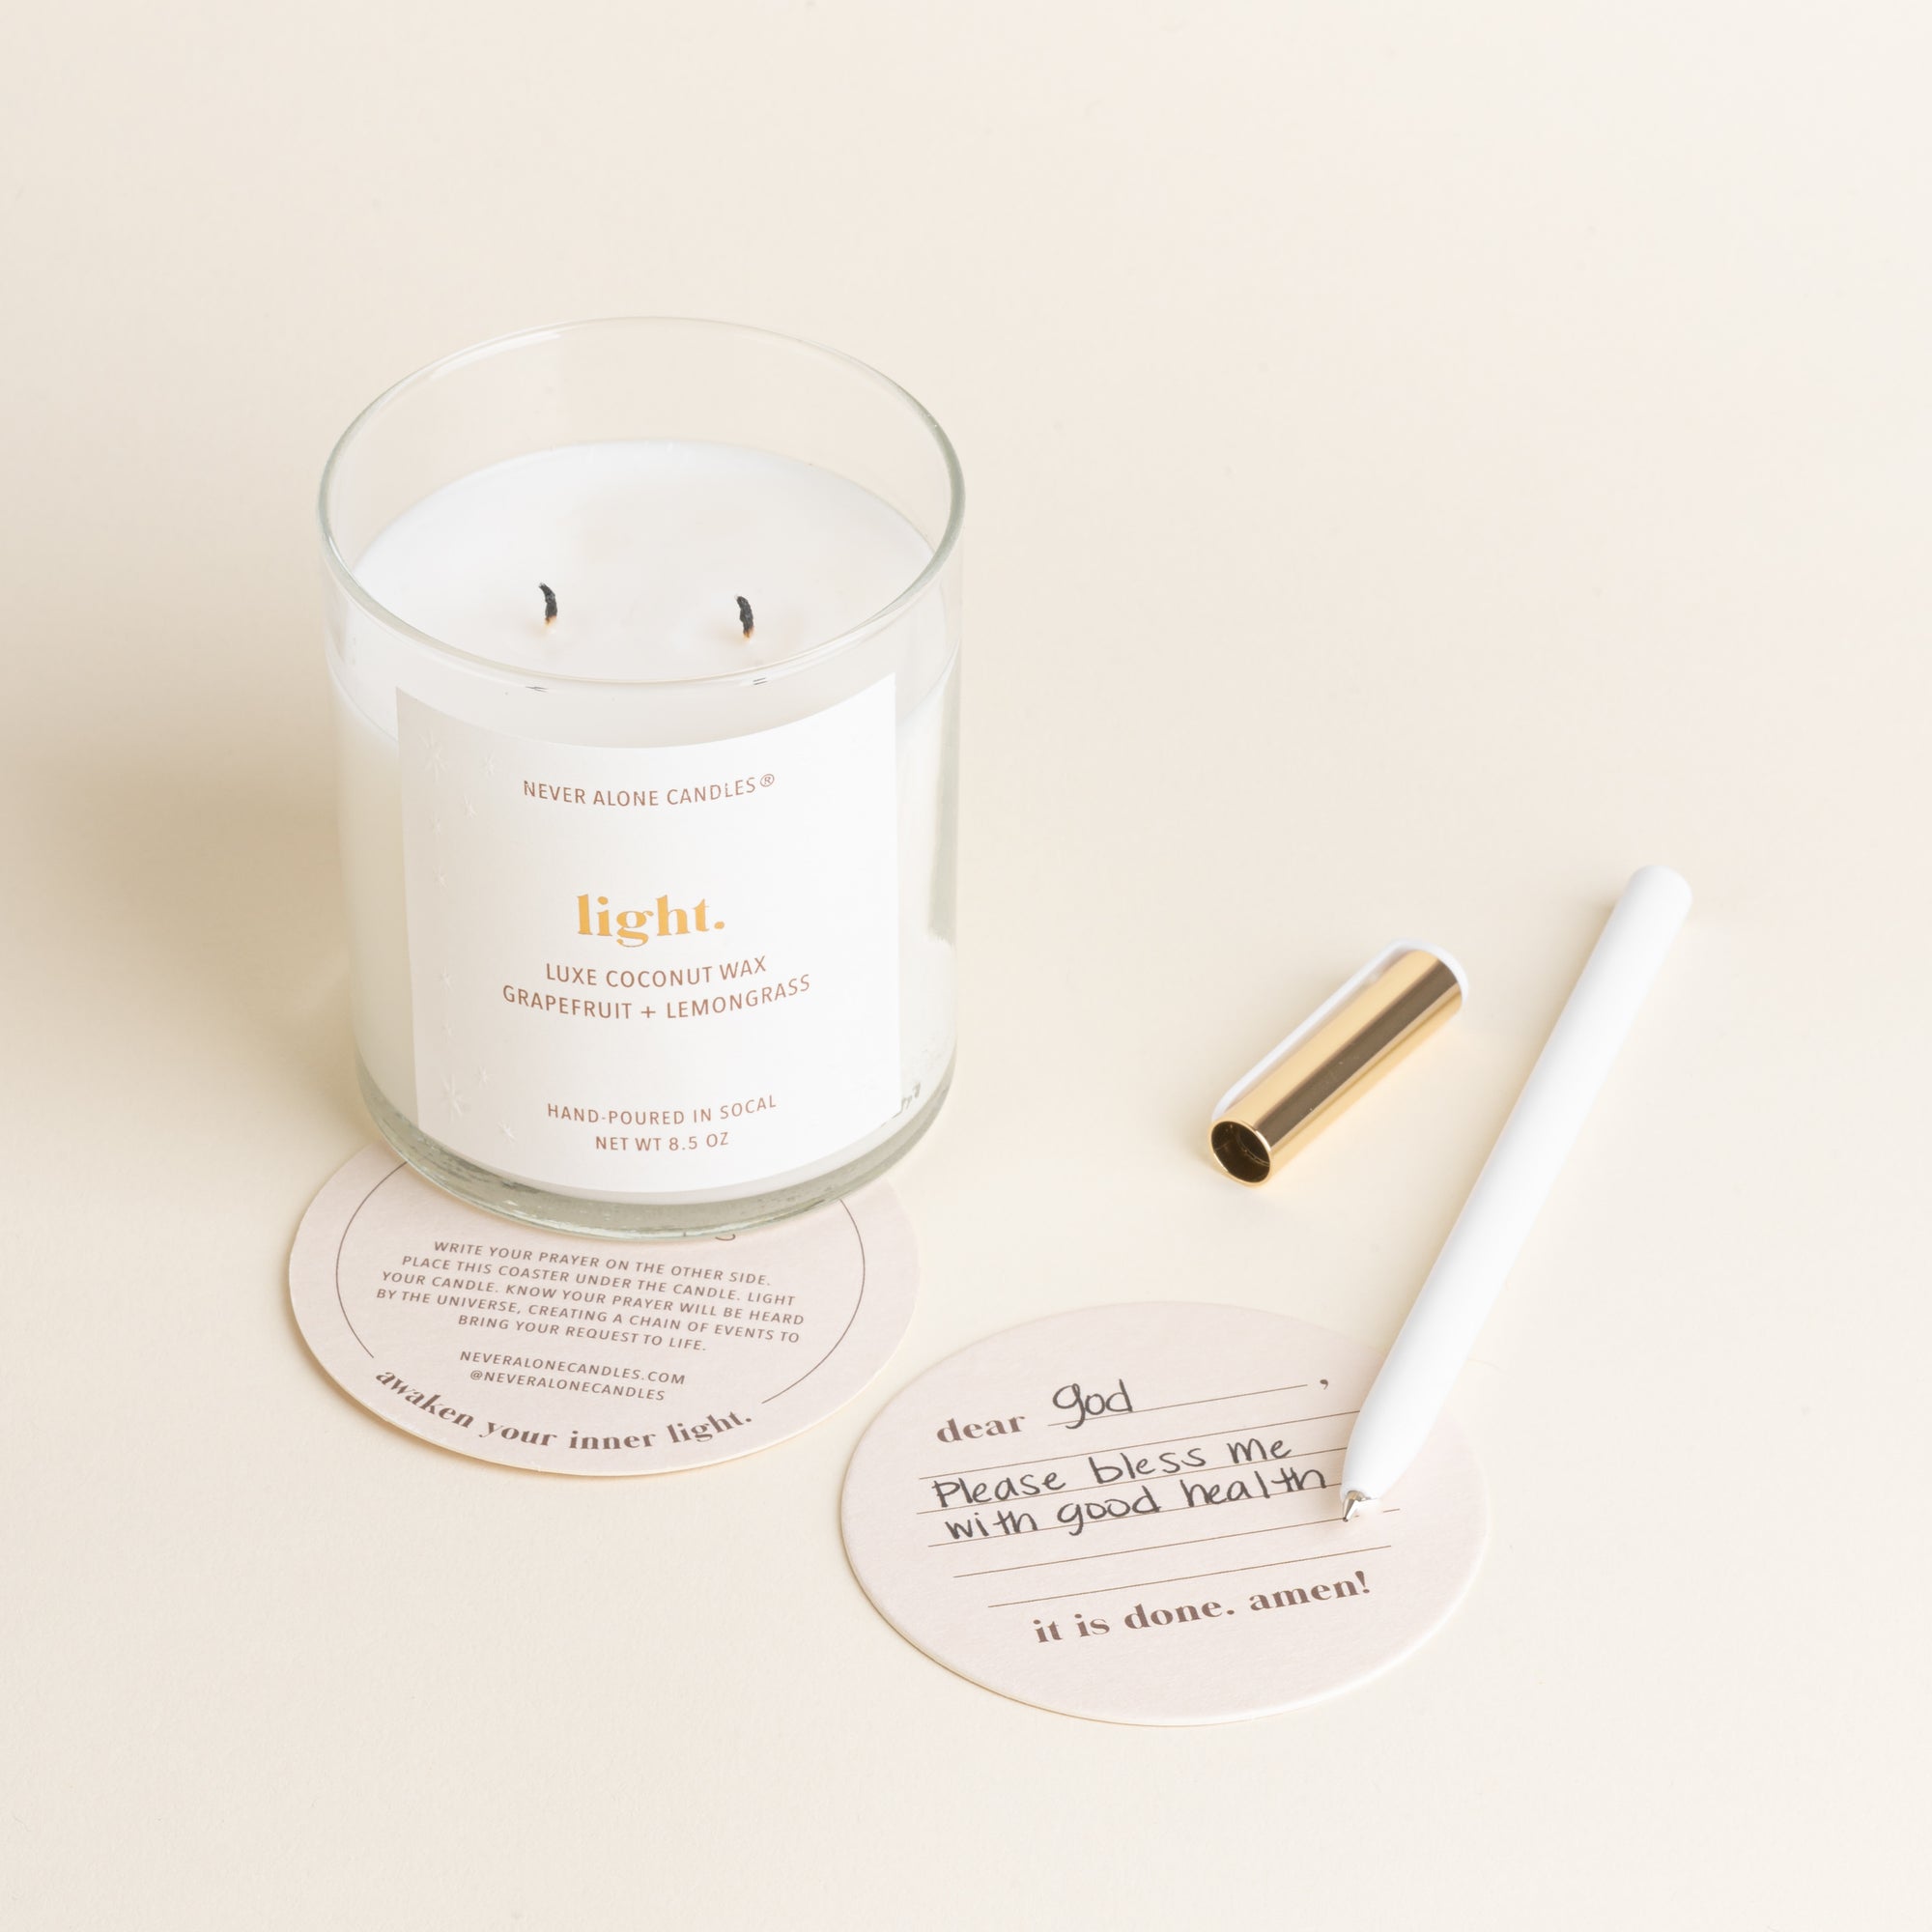 A candle prayer method for your challenging days in life scented in grapefruit and lemongrass